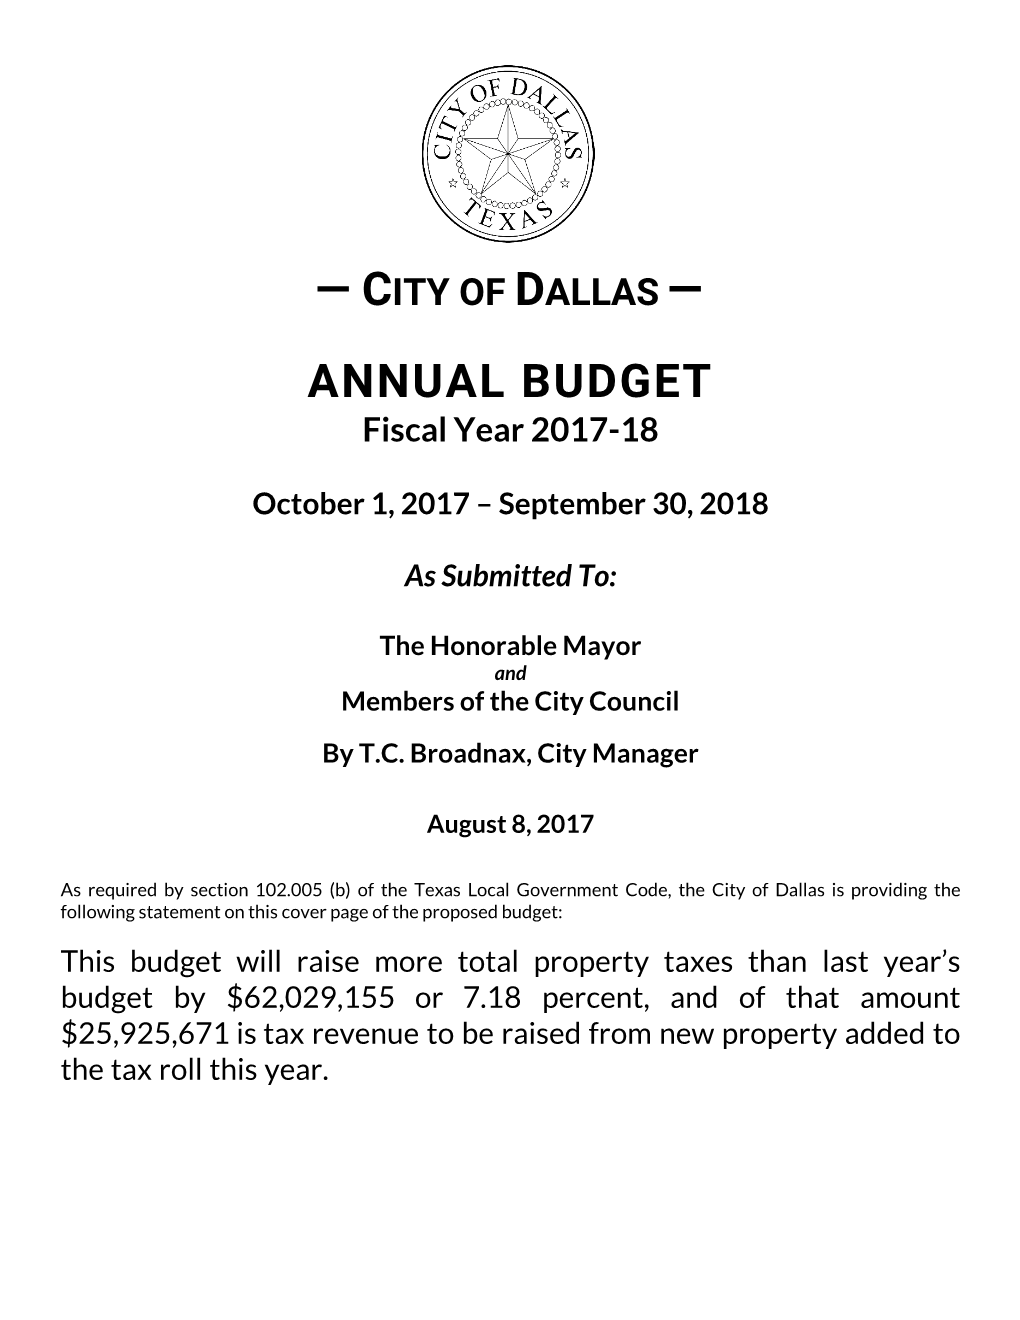 ANNUAL BUDGET Fiscal Year 2017-18